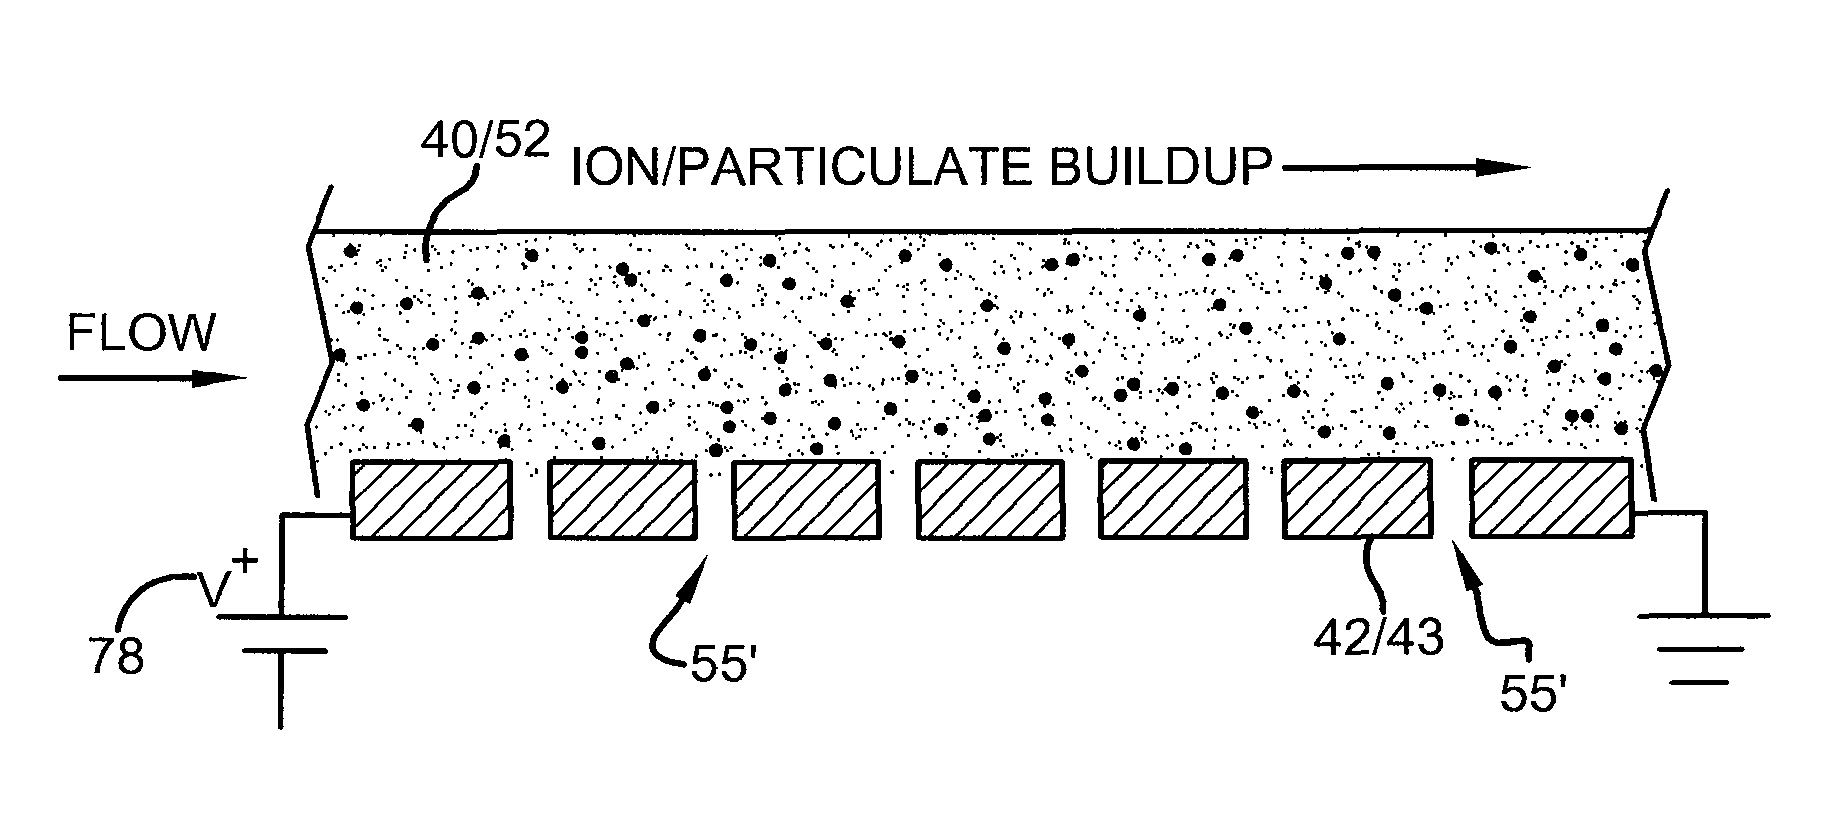 Tunable layered membrane configuration for filtration and selective isolation and recovery devices